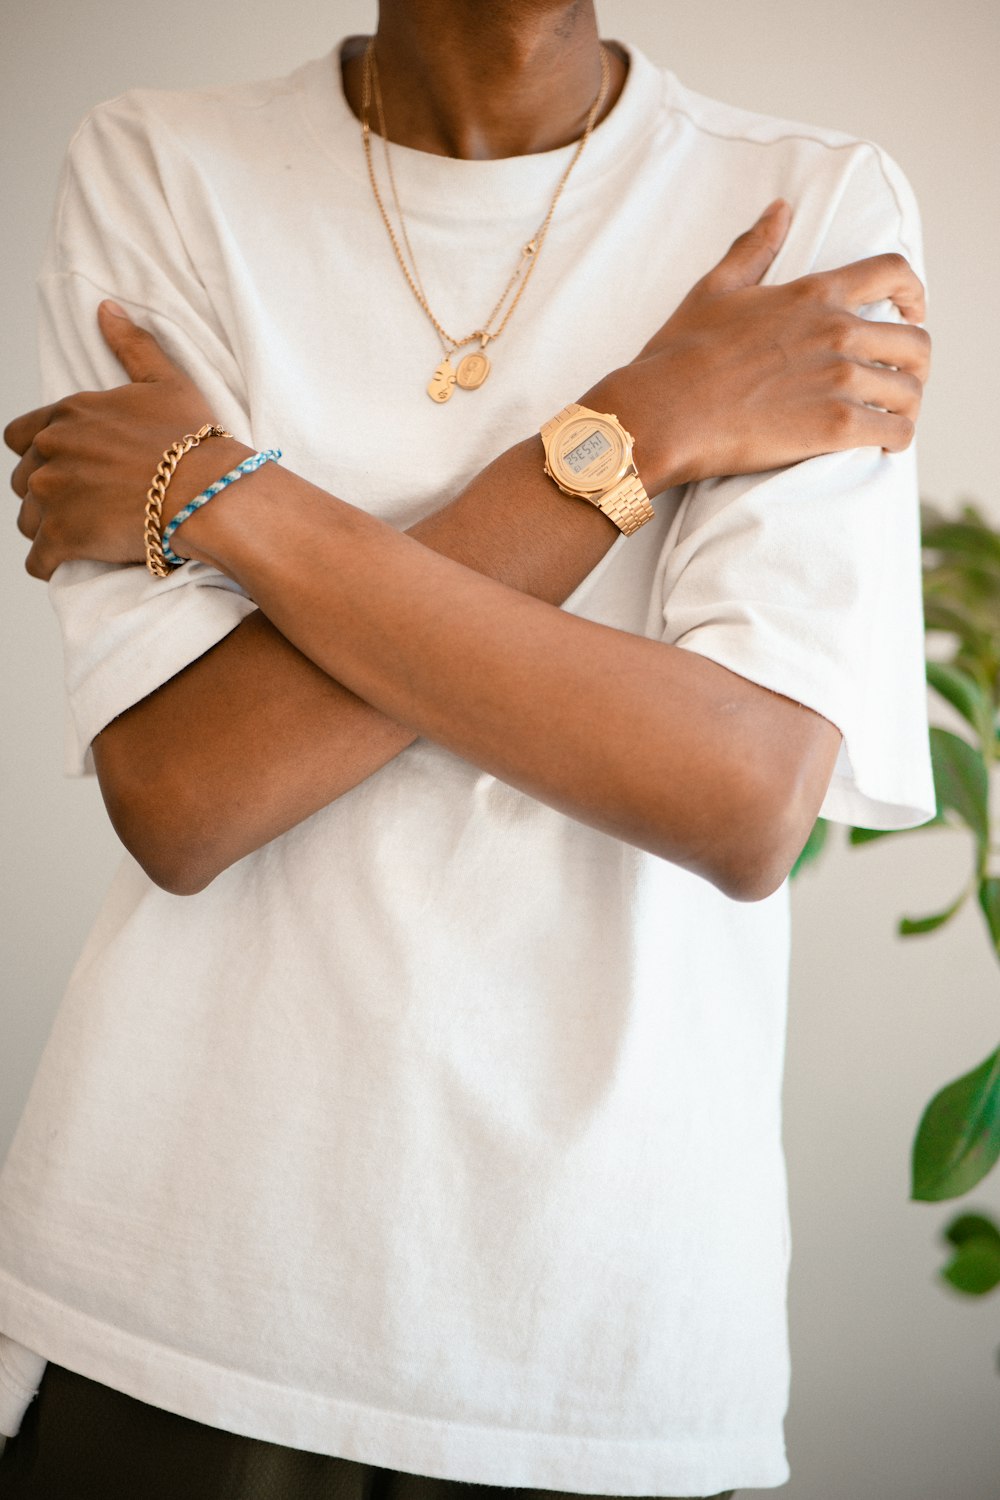 a woman wearing a white shirt and a gold watch